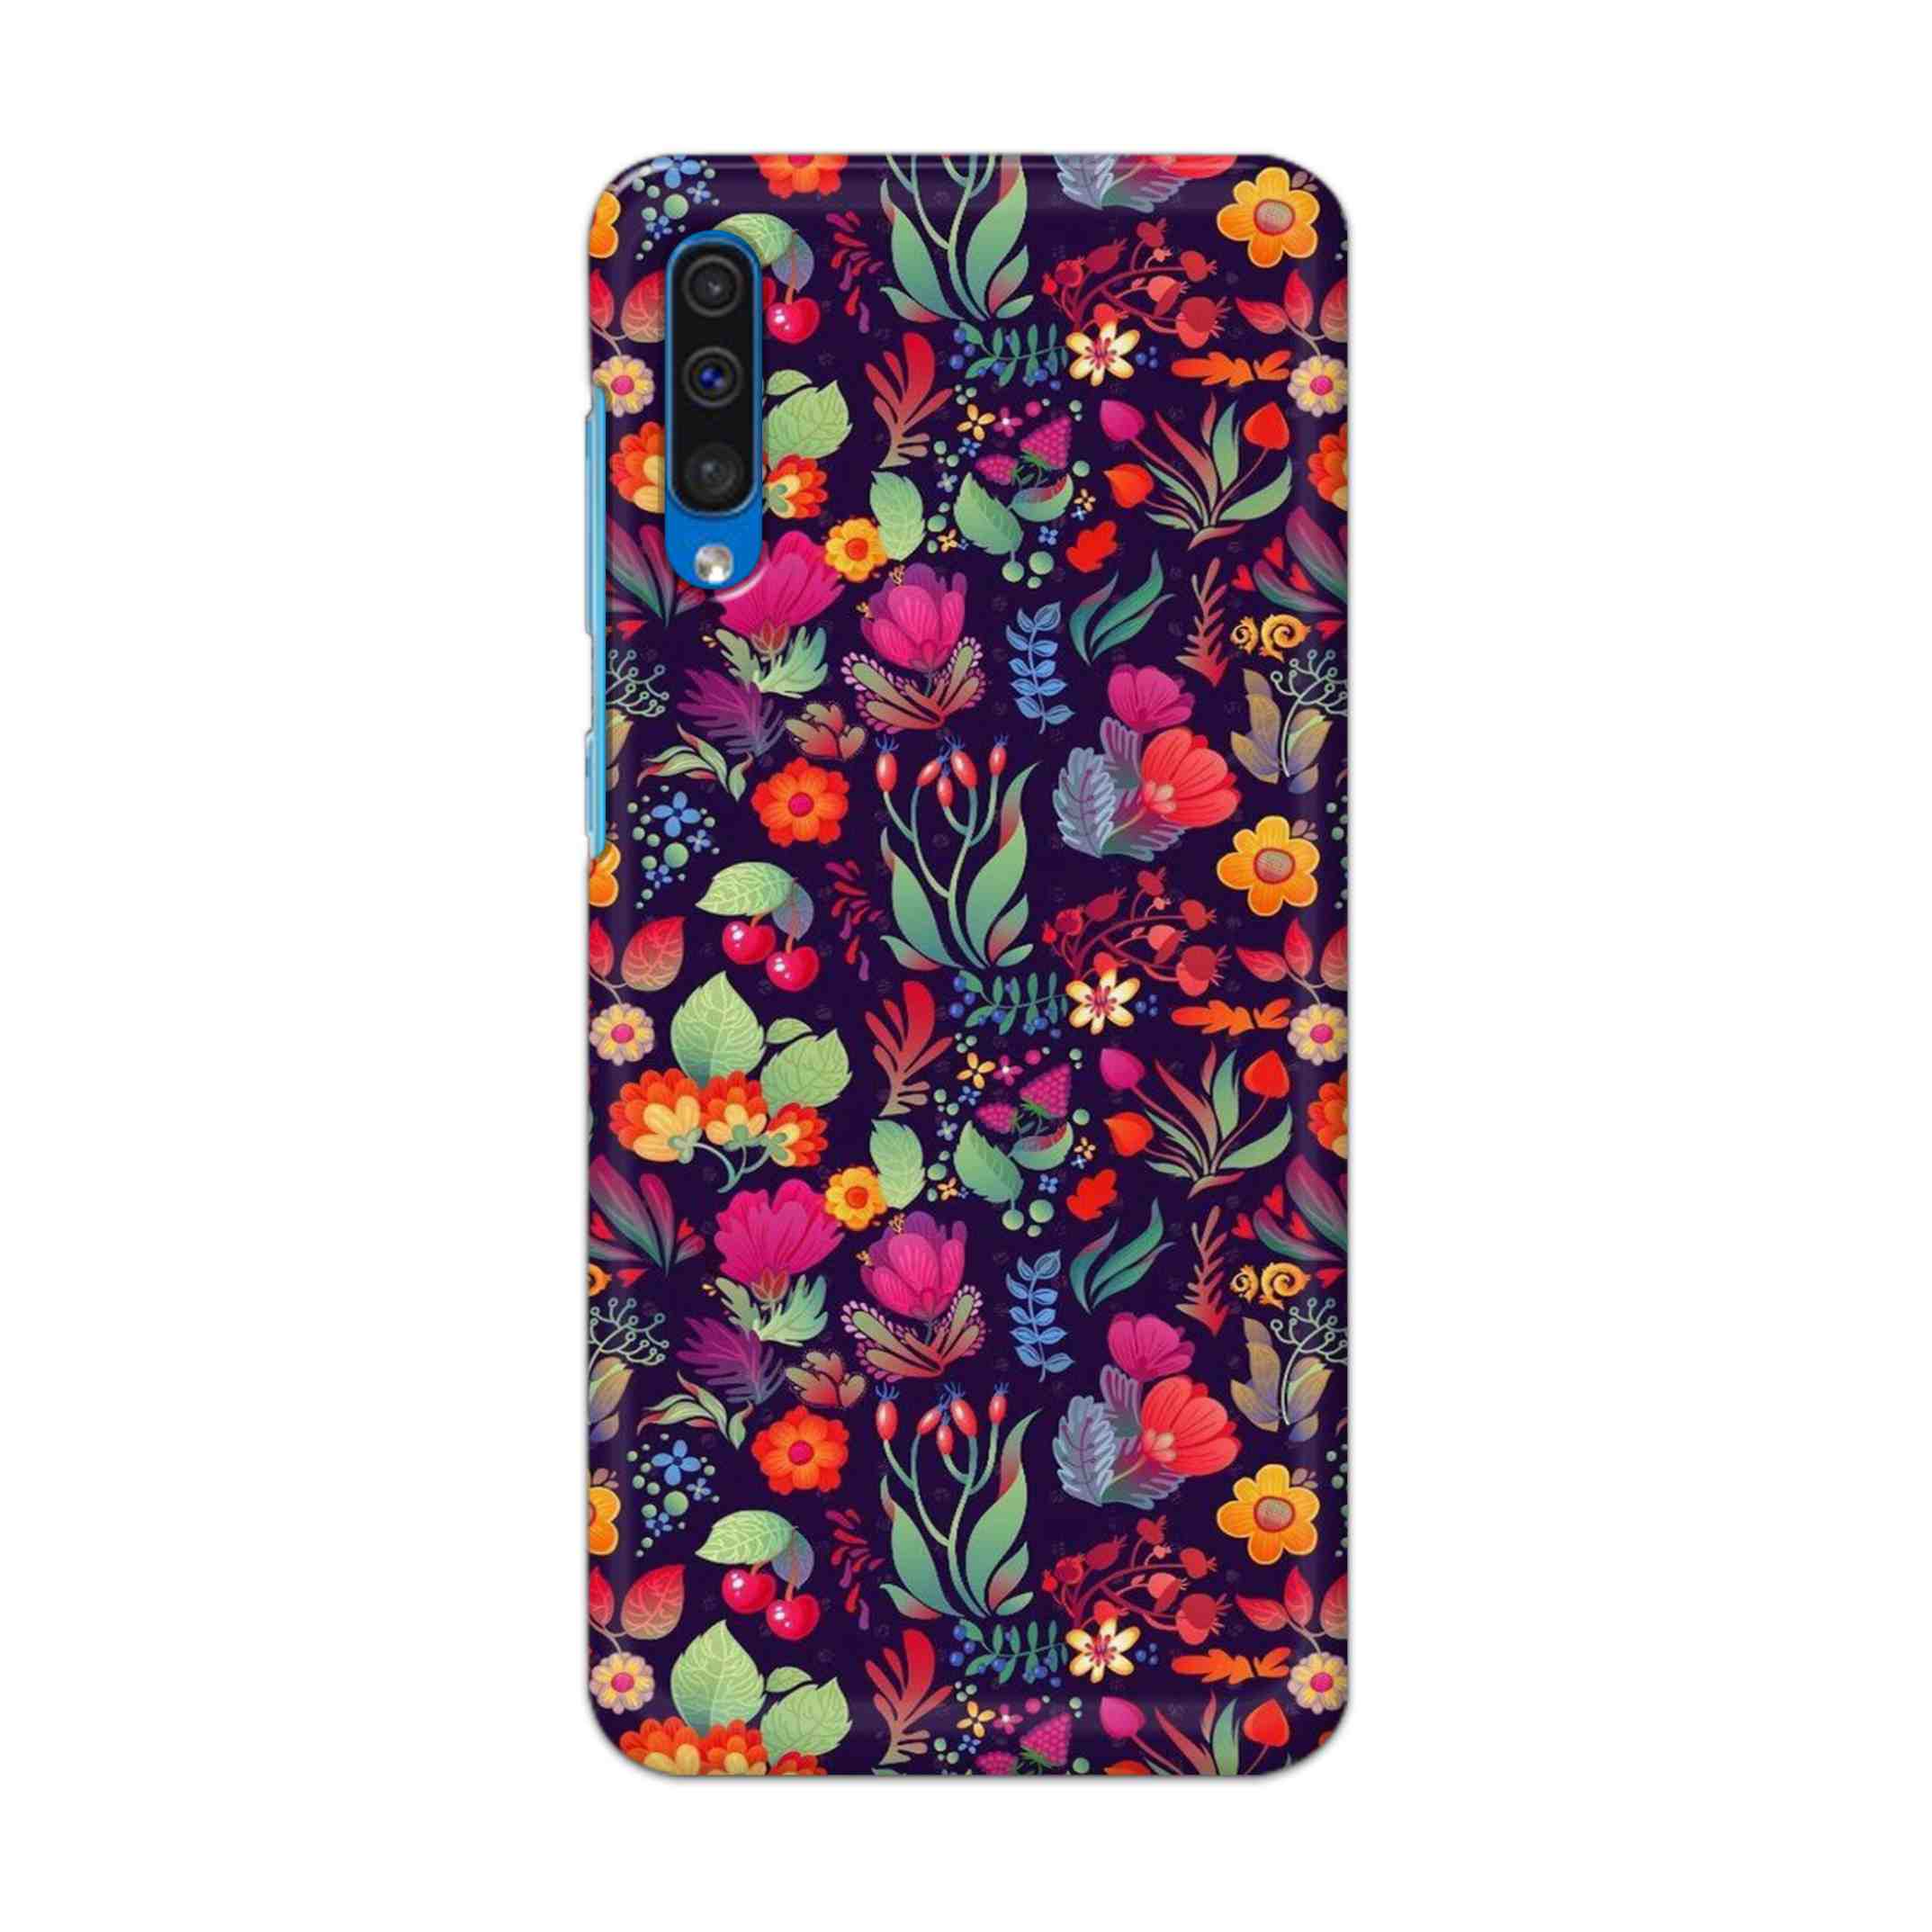 Buy Fruits Flower Hard Back Mobile Phone Case Cover For Samsung Galaxy A50 / A50s / A30s Online